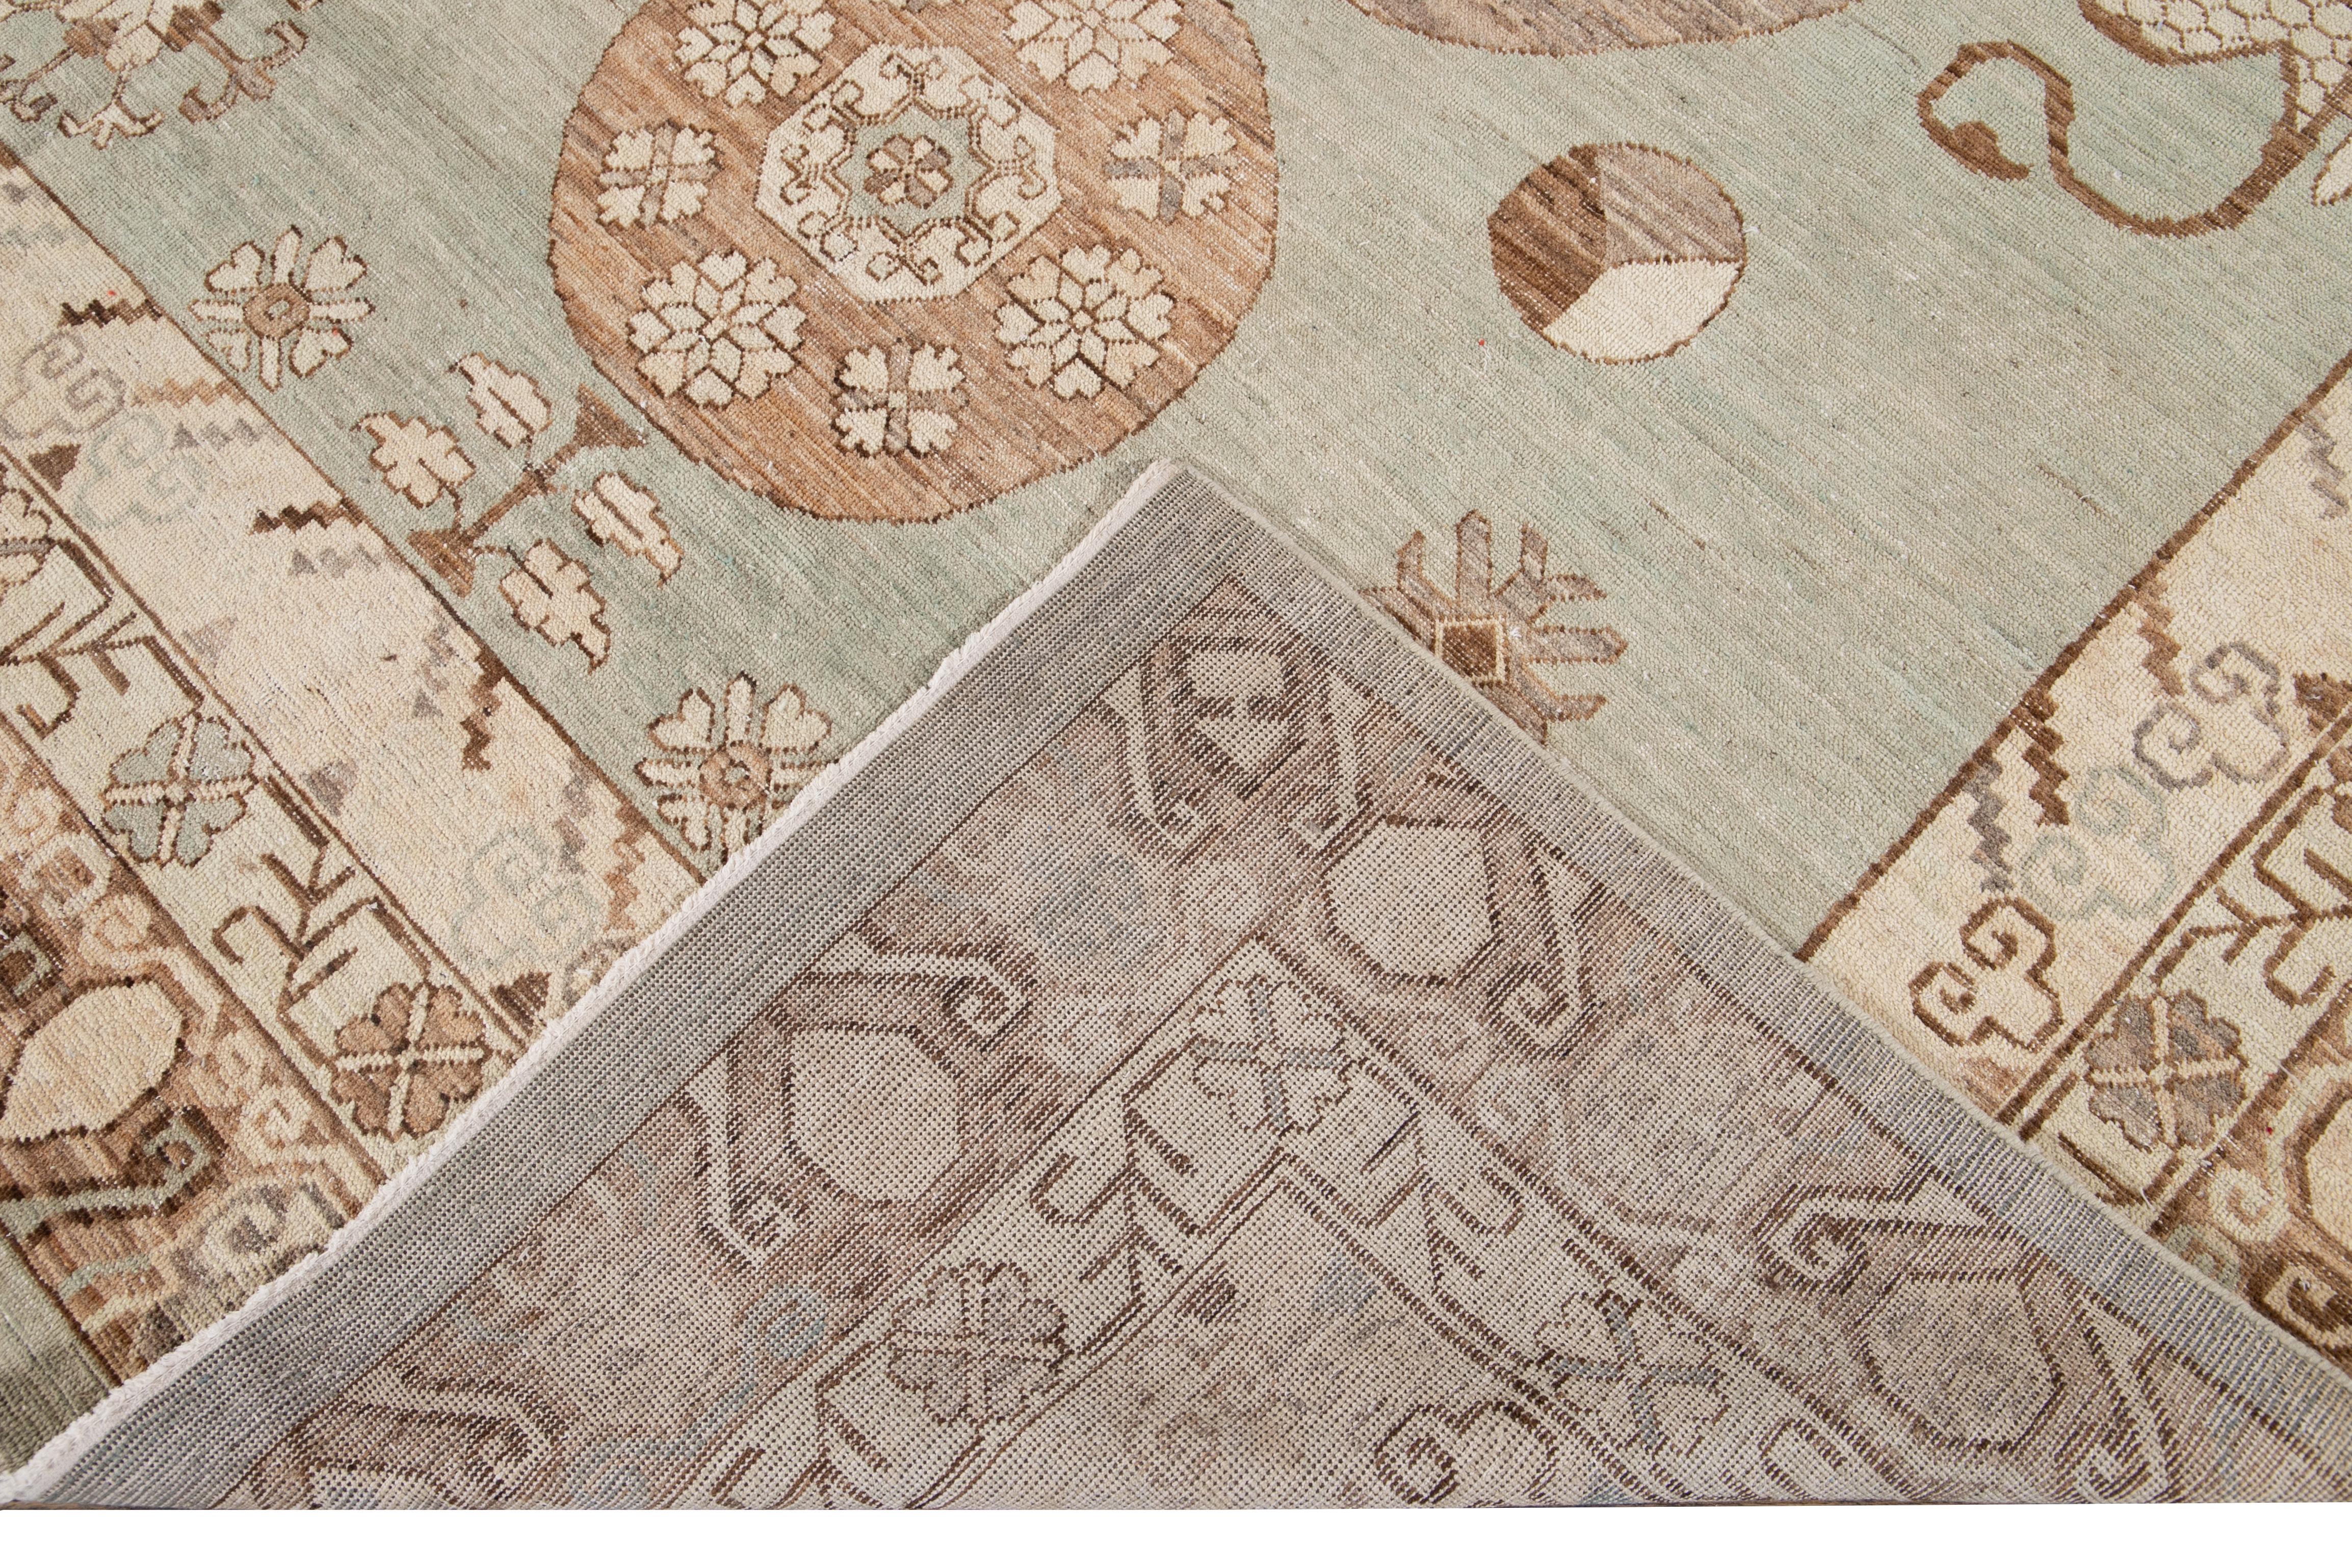 Beautiful Modern Khotan style hand knotted wool rug green field. This Khotan-style rug has a beautifully designed frame and accent of green, beige, and brown in a gorgeous all-over geometric medallion floral design.

This rug measures 7'10